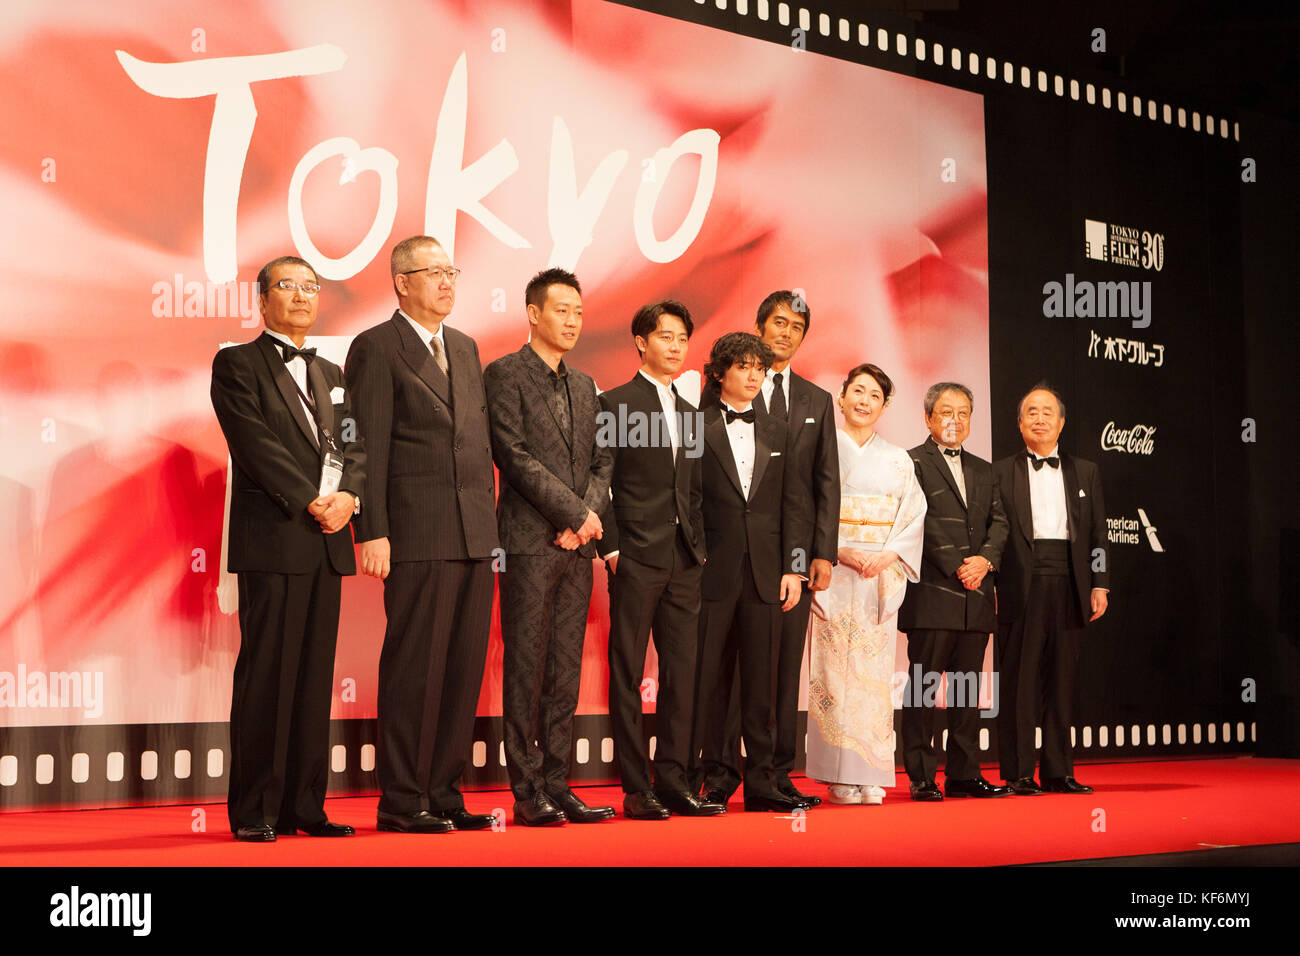 Legend of the Demon Cat, Actor Hiroshi Abe, Keiko Matsuzaka appears on the opening red carpet for The 30th Tokyo International Film Festival in Roppongi on October 25th, 2017, in Tokyo, Japan. The festival runs from October 25th to November 3rd at venues in Tokyo. Credit: Michael Steinebach/AFLO/Alamy Live News Stock Photo